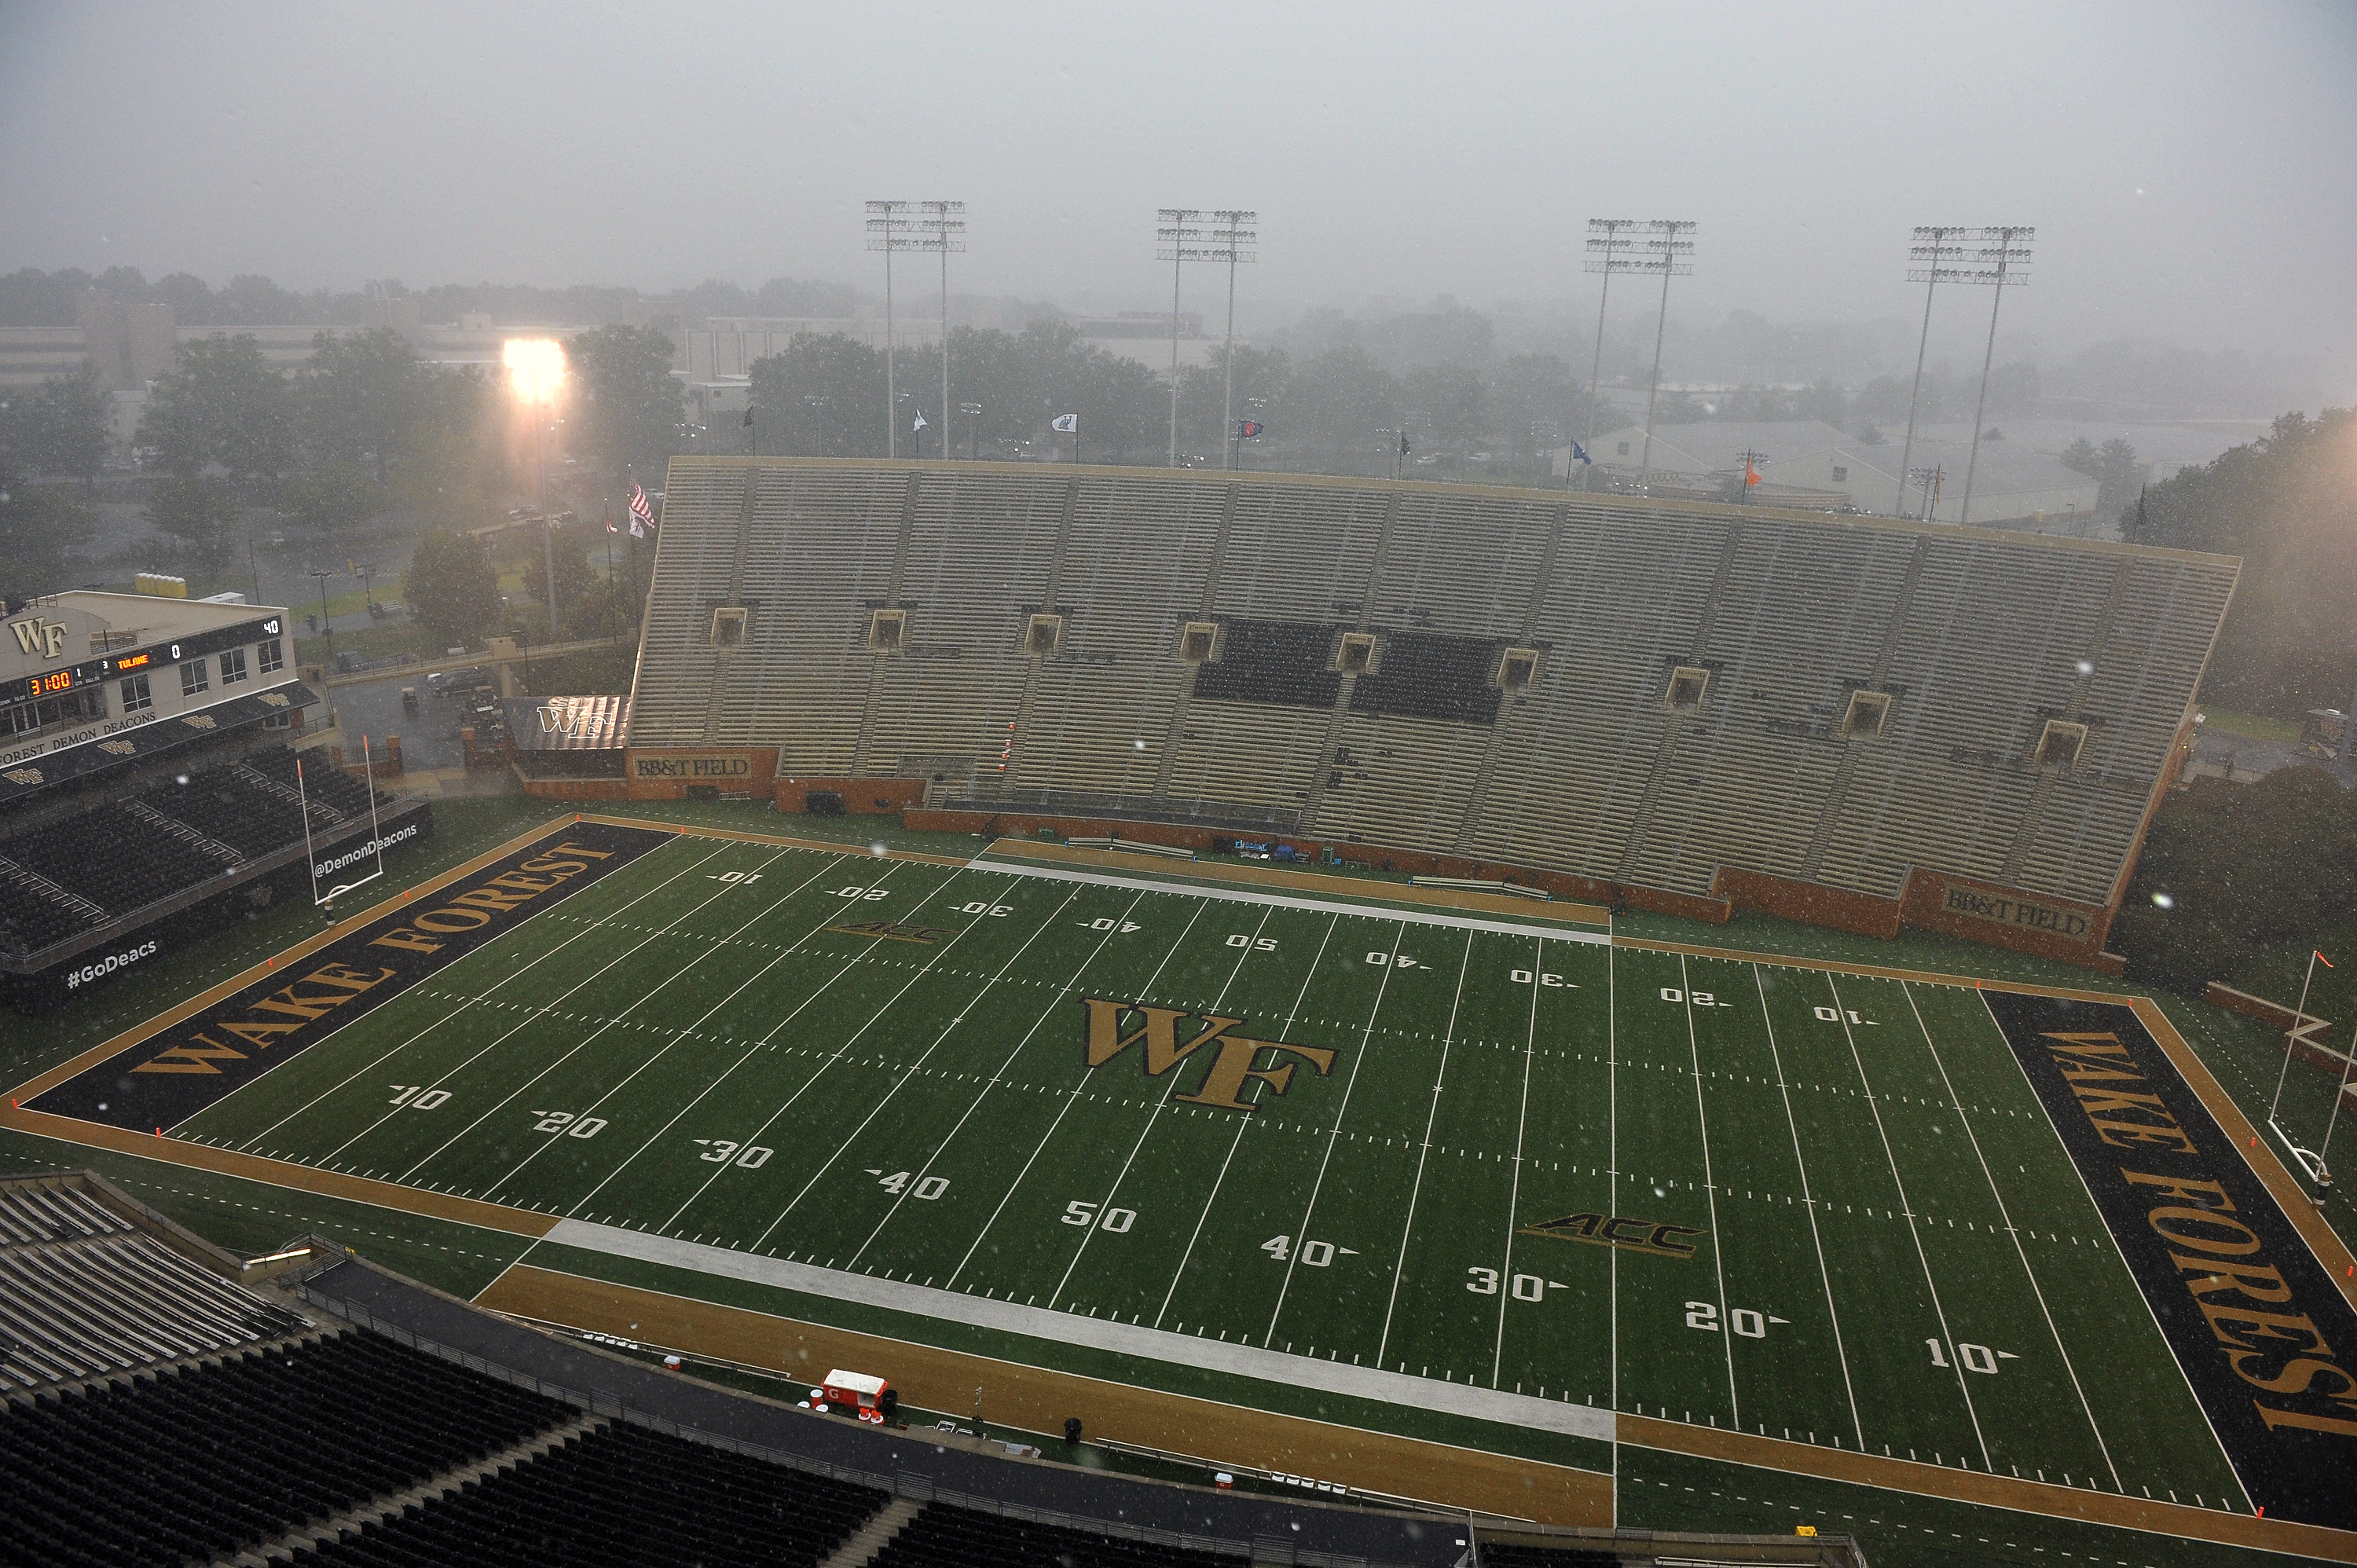 WINSTON-SALEM, NC - SEPTEMBER 01: A general view during a rainstorm prior to the game between the Tulane Green Wave and the Wake Forest Demon Deacons at BB&T Field on September 1, 2016 in Winston-Salem, North Carolina.   Lance King/Getty Images/AFP